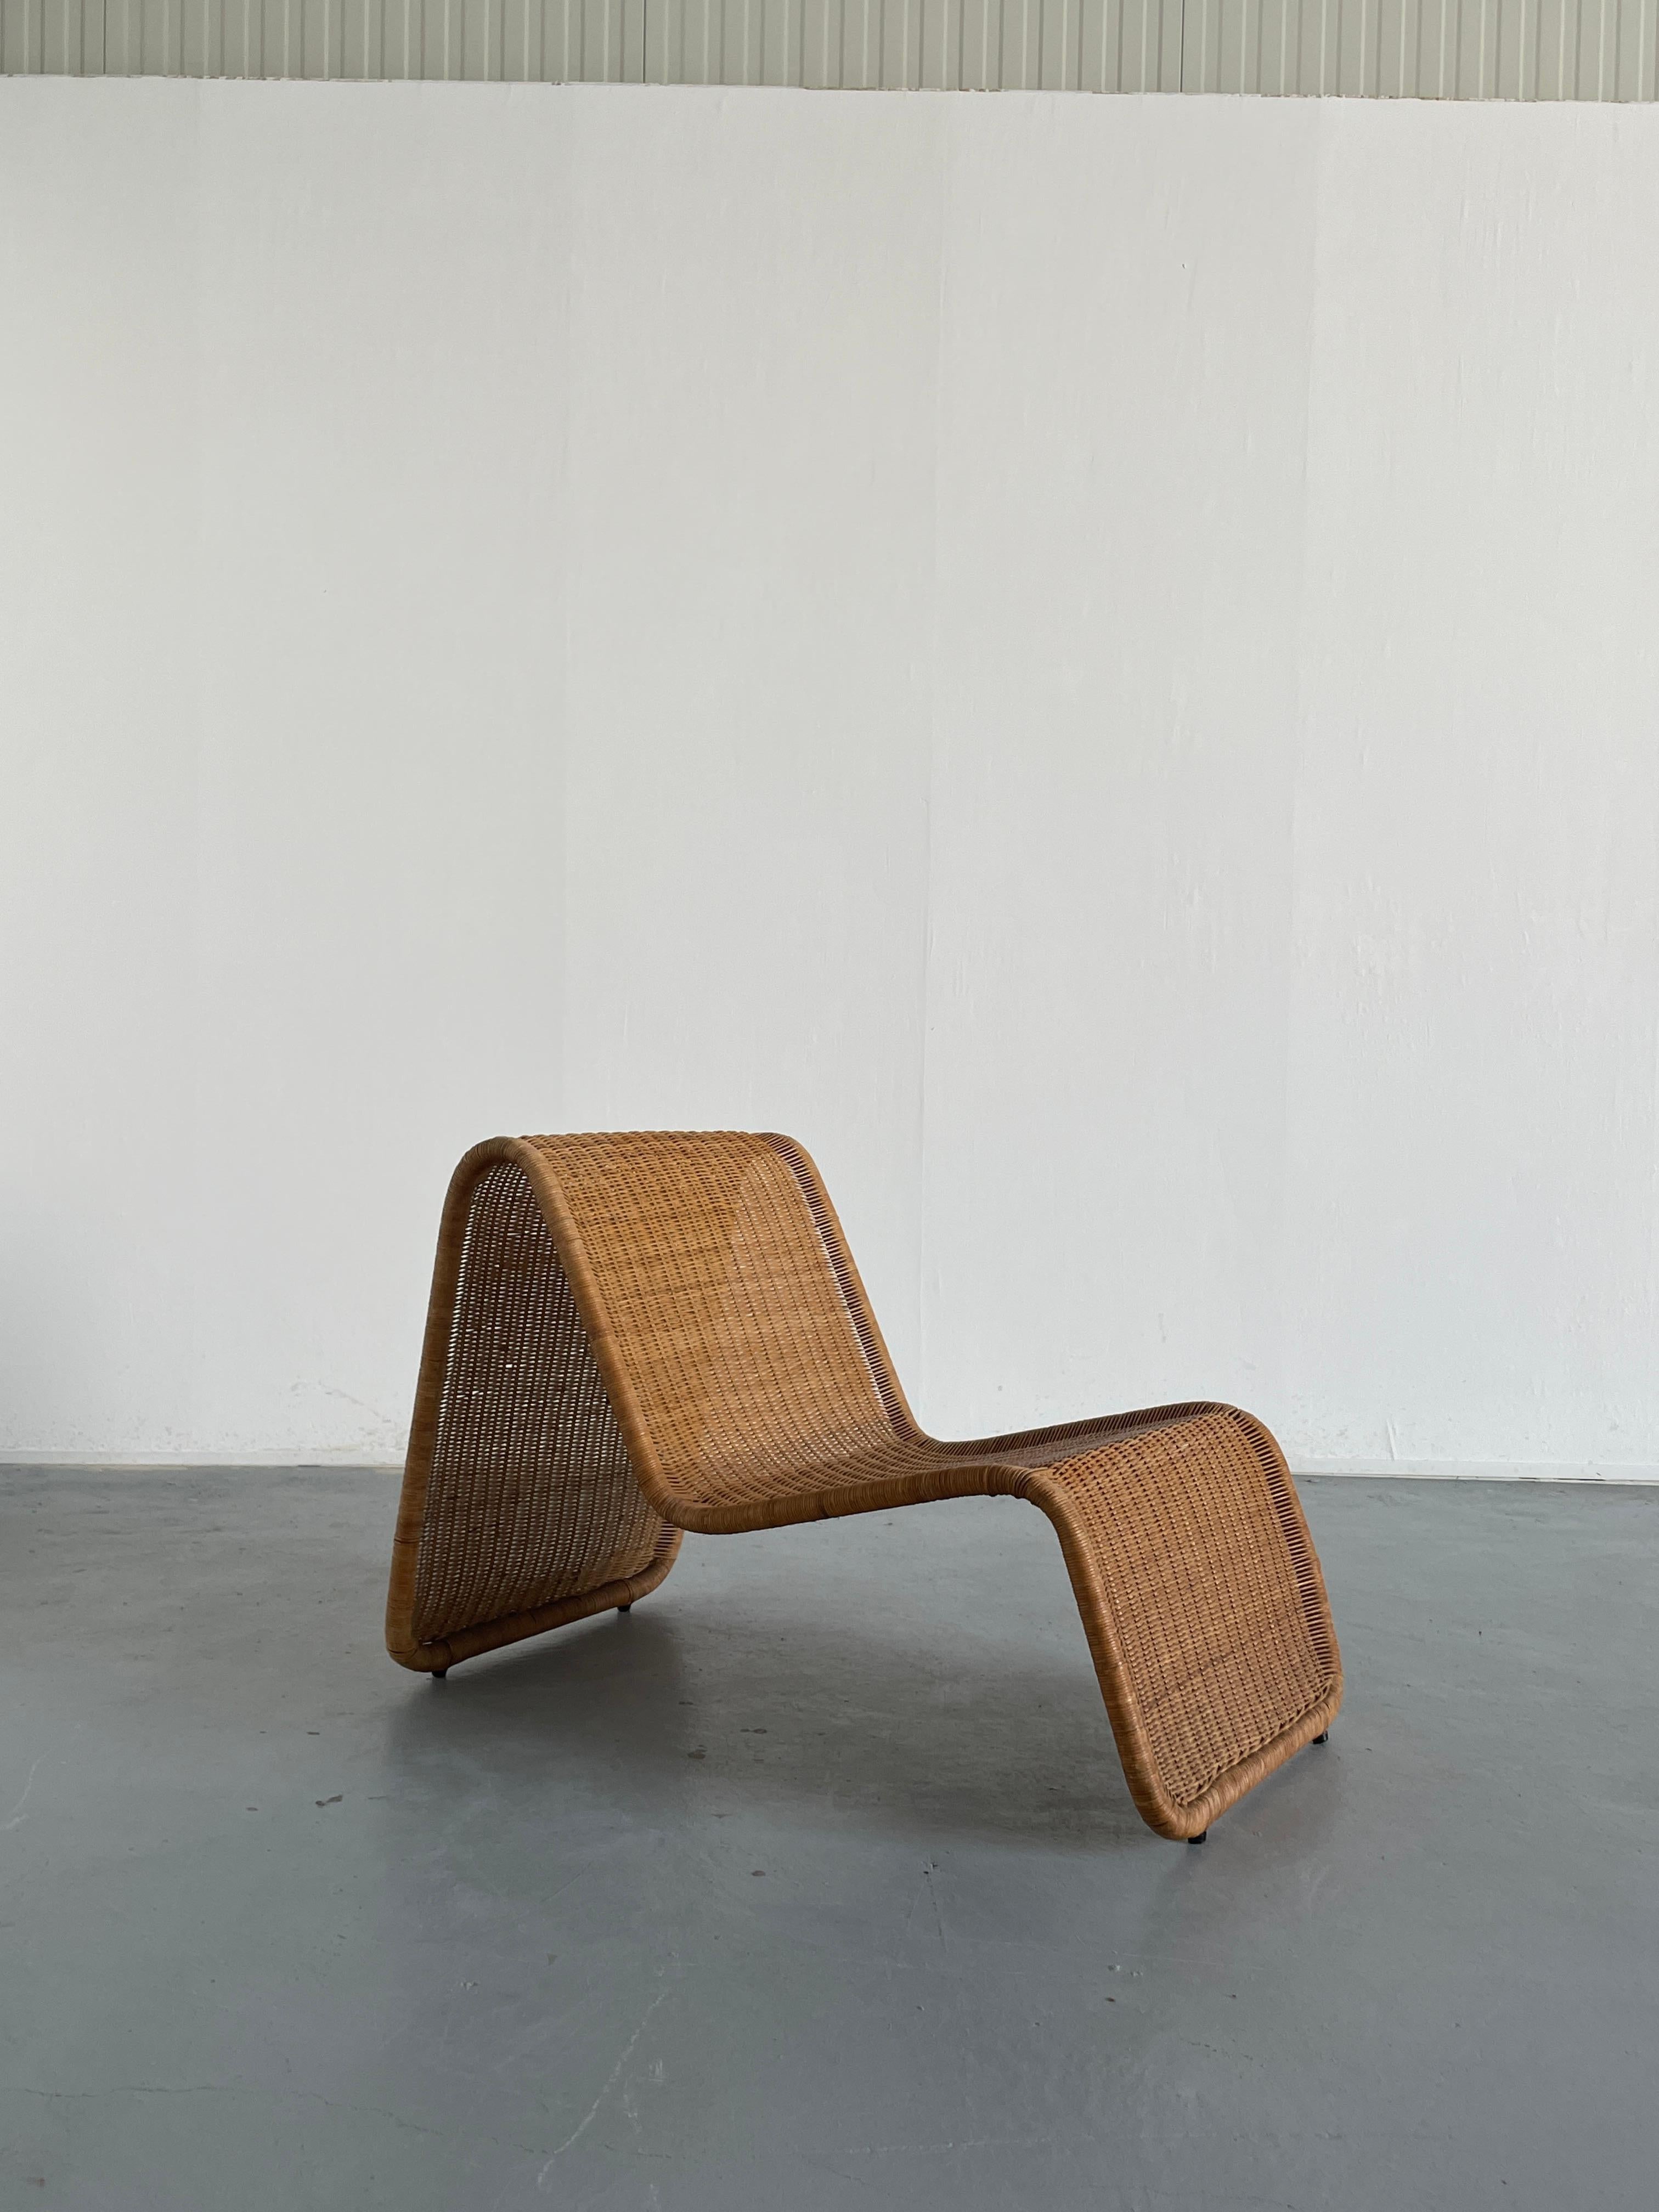 Vintage ratan lounger chair 'Hestra' produced by IKEA in the early 1980s.
Inspired by and produced around the same time as the 'P3' chair desgined by Tito Agnoli and produced by Pierantonio Bonacina. 

Made from wicker woven around a tubular steel